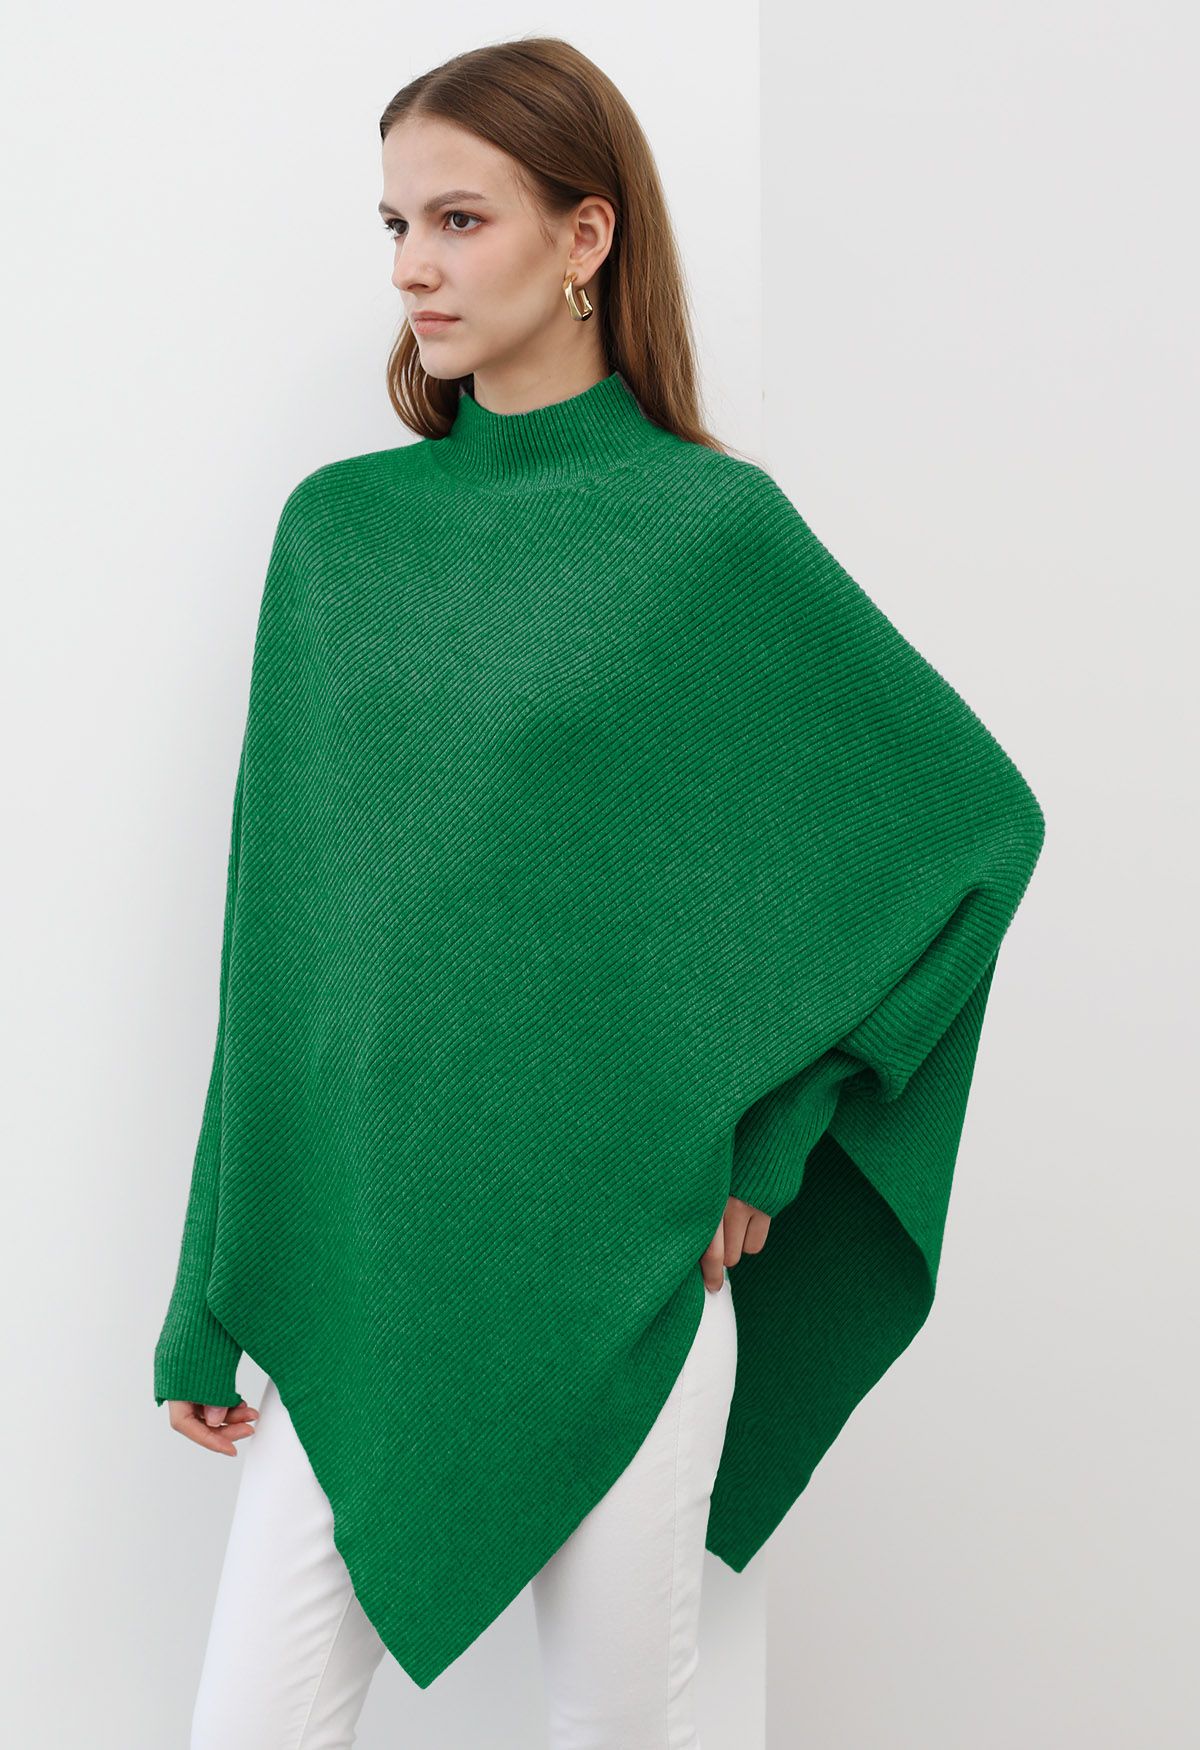 Asymmetric Batwing Sleeve Ribbed Knit Poncho in Green - Retro, Indie and  Unique Fashion